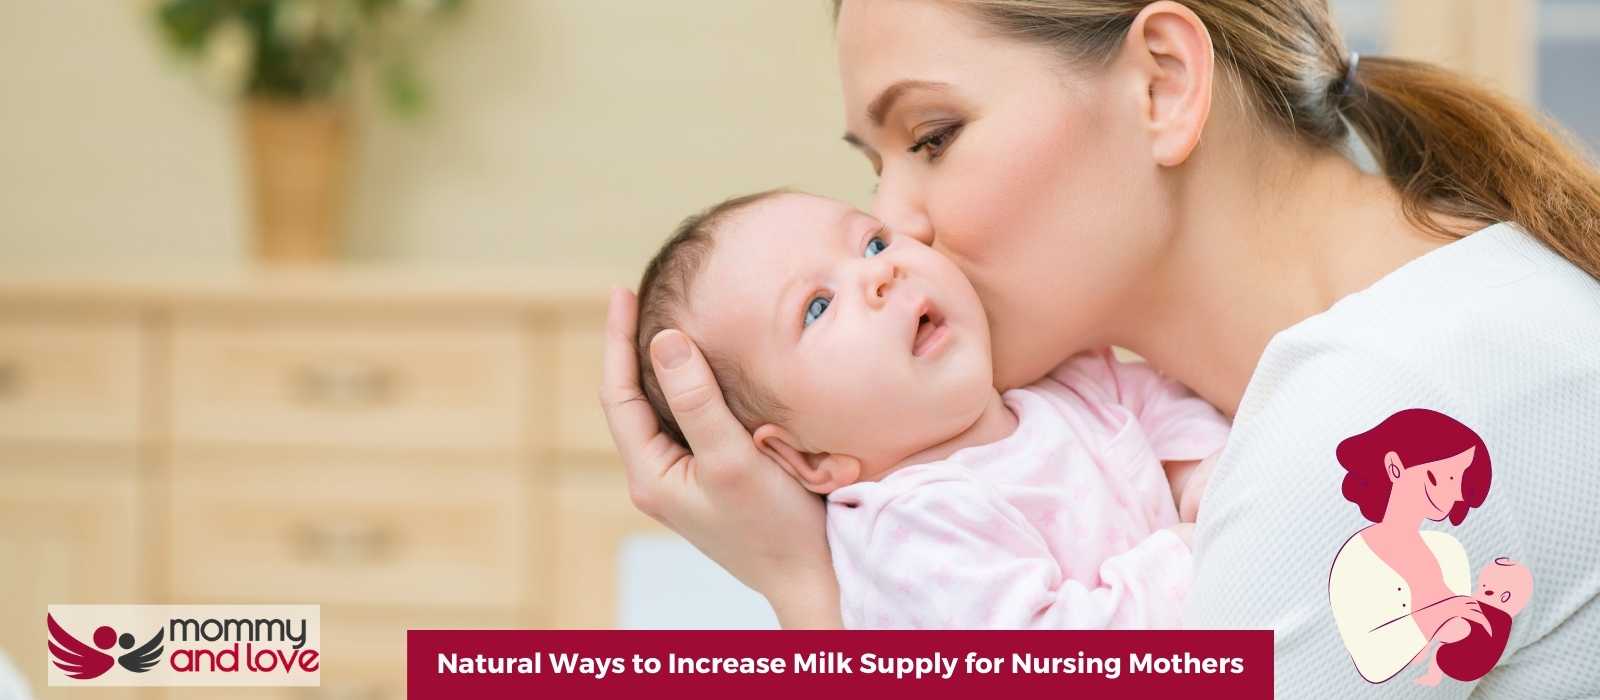 Natural Ways to Increase Milk Supply for Nursing Mothers